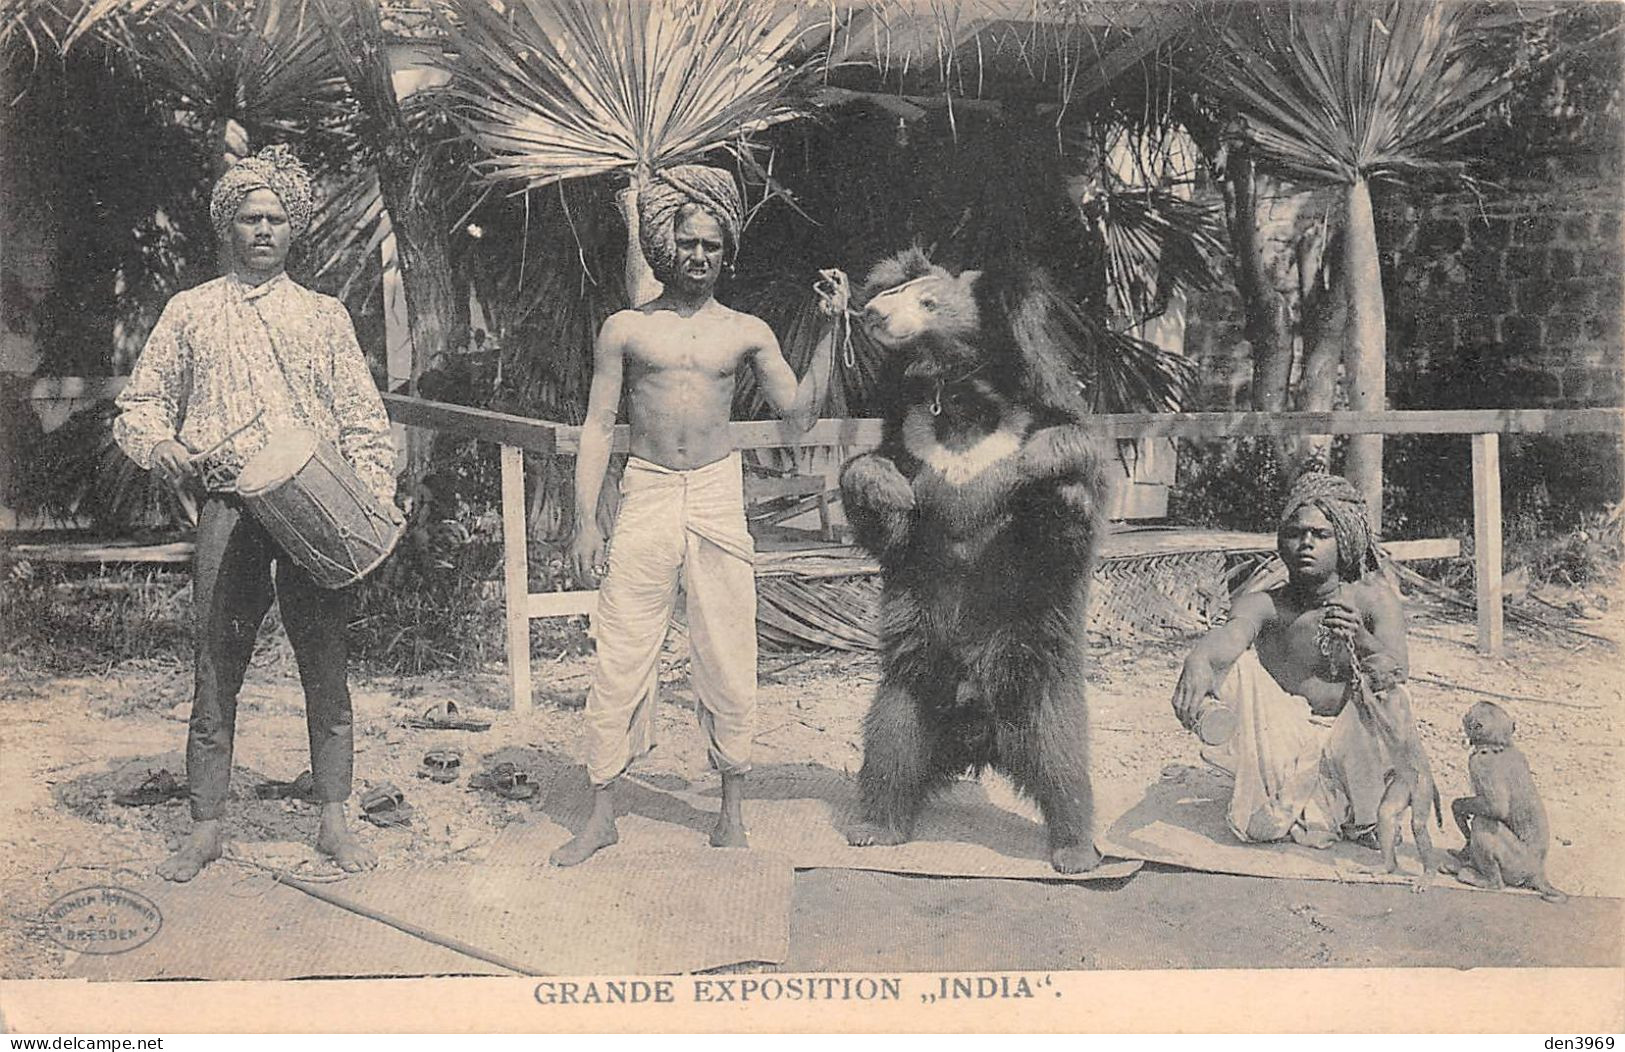 Inde - Grande Exposition INDIA - Montreur D'Ours, Tambourinaire - Inde